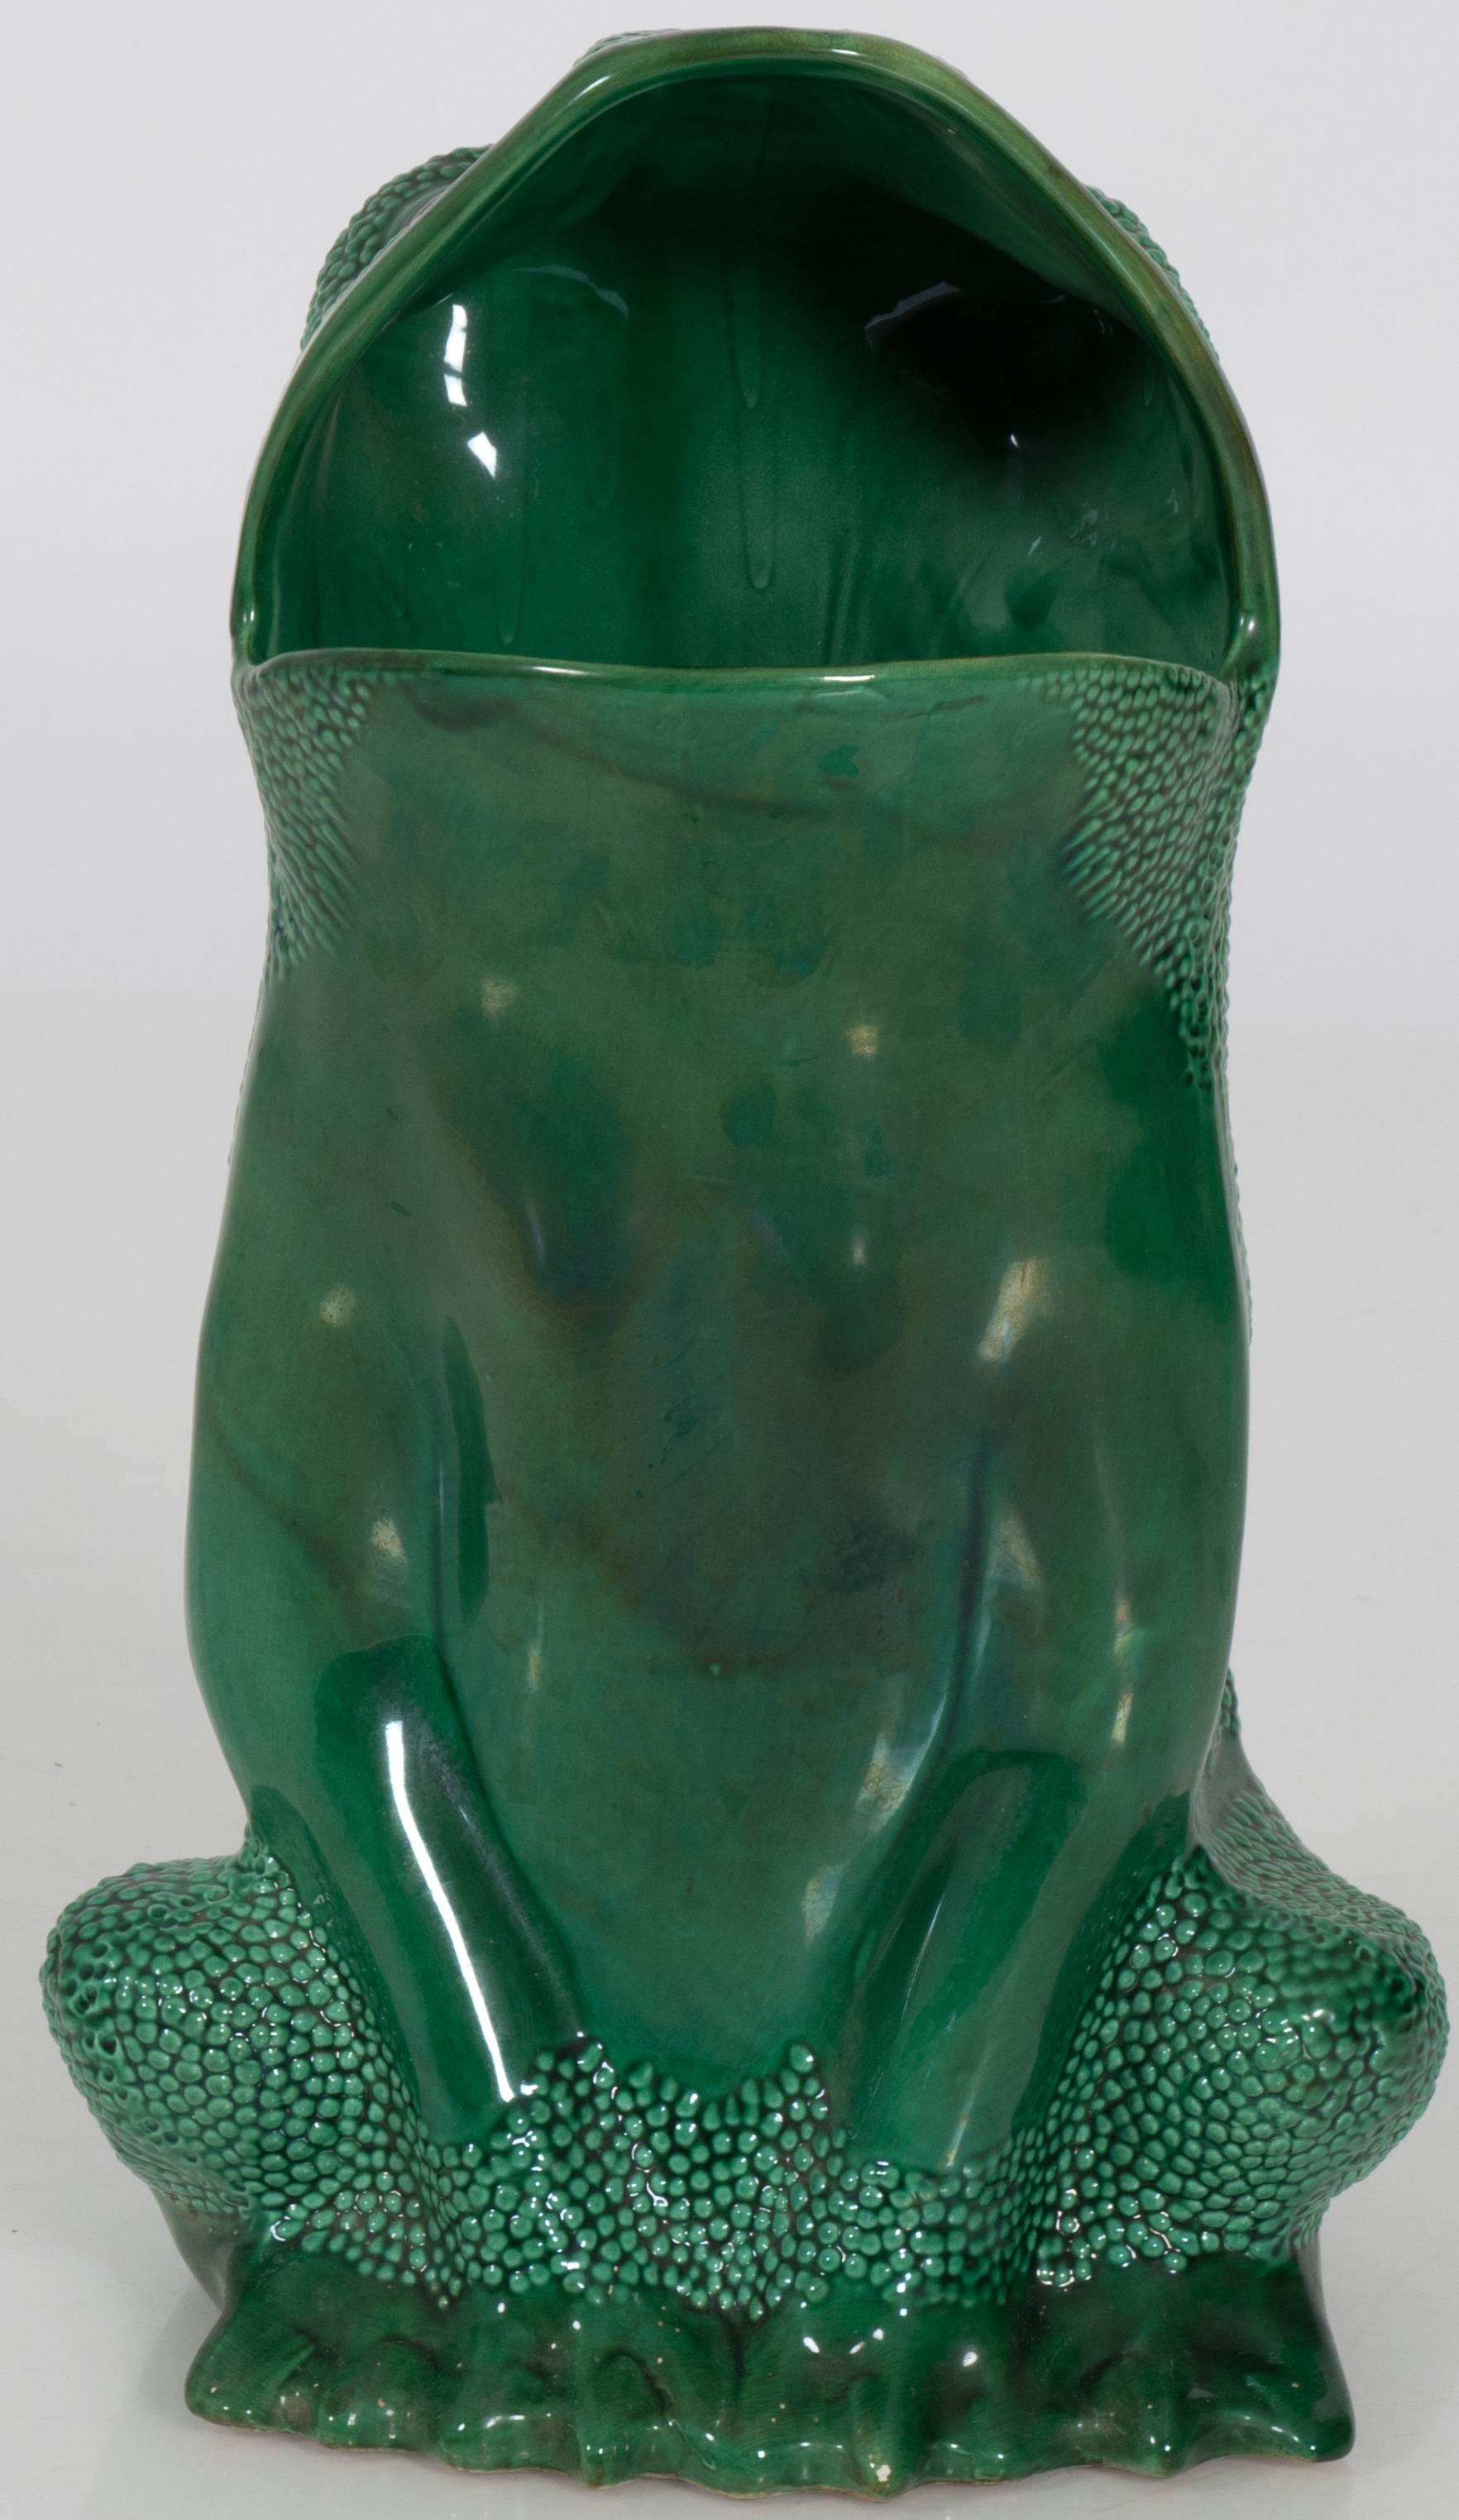 1960s Italian ceramic frog umbrella stand. Green crackle glaze finish. Made for Gumps of San Francisco. Stamped on the bottom.